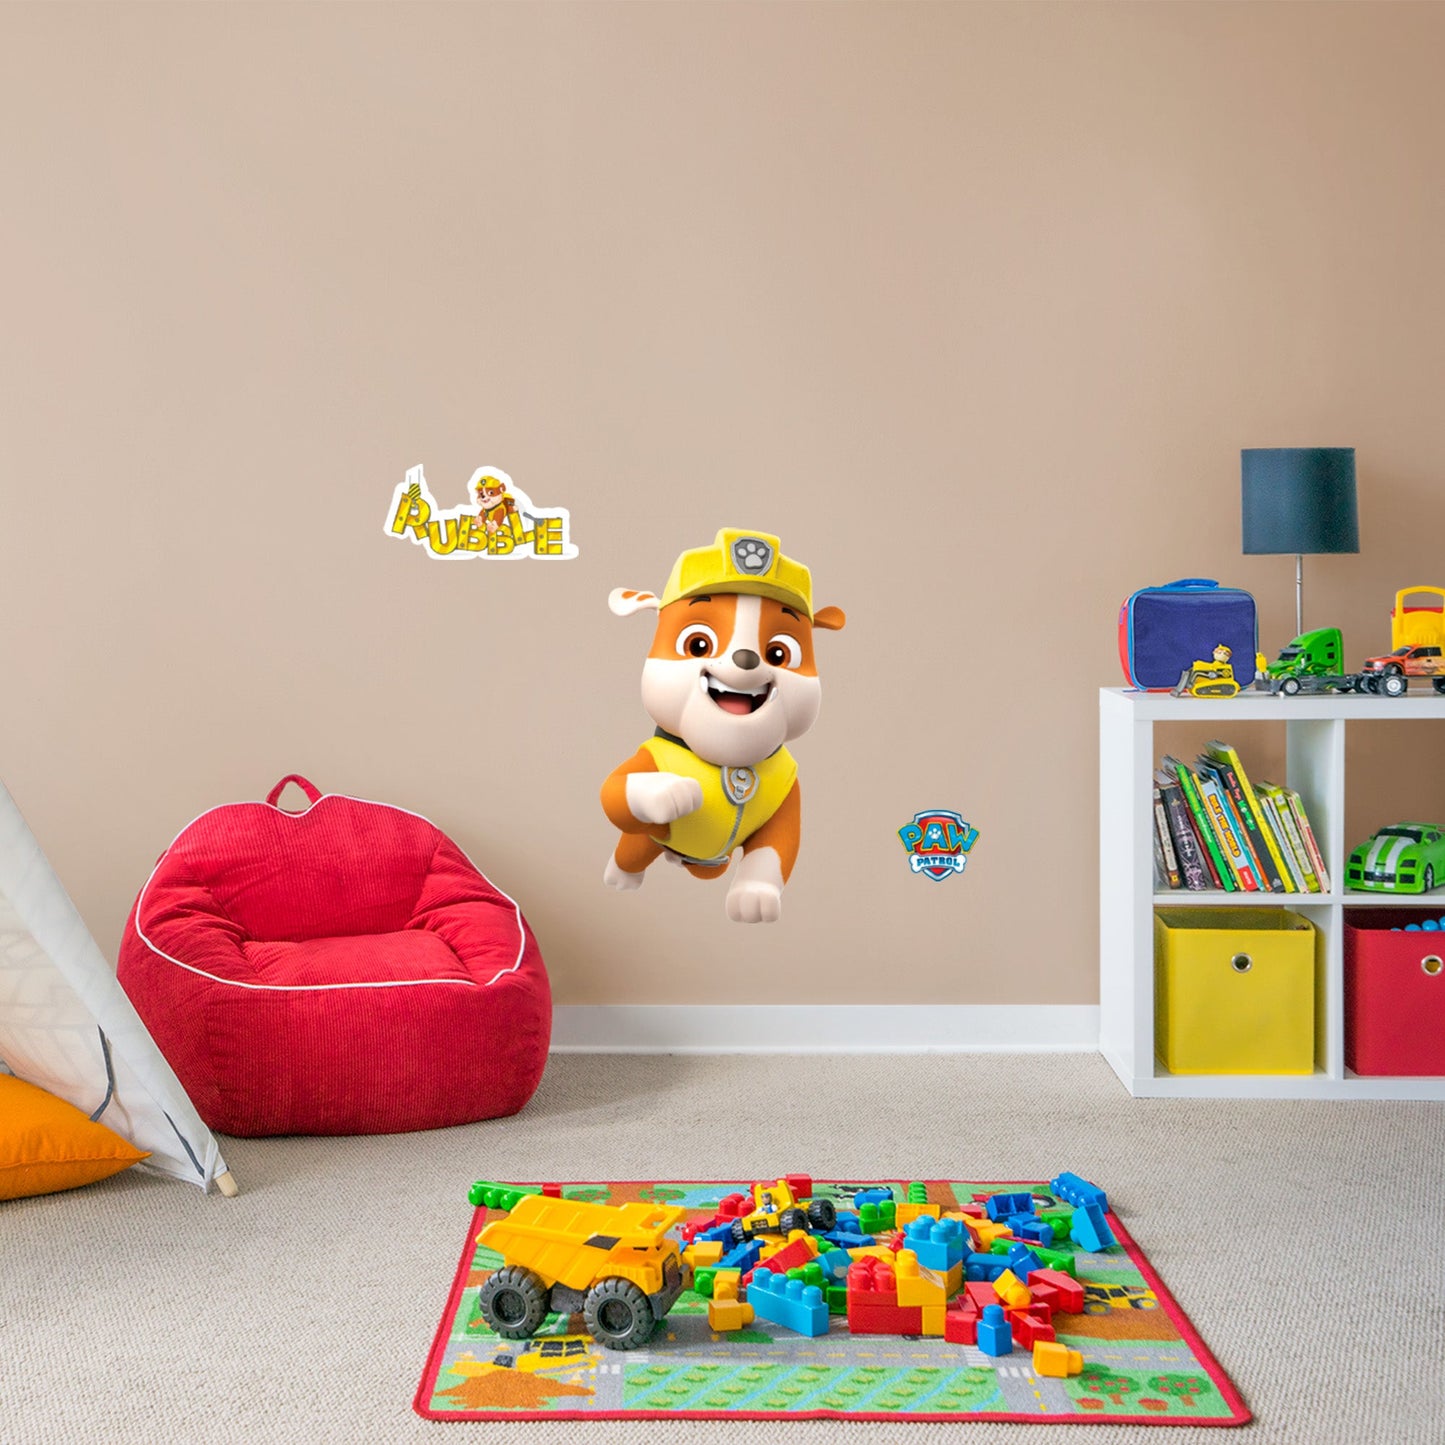 Paw Patrol: Rubble RealBig - Officially Licensed Nickelodeon Removable Adhesive Decal